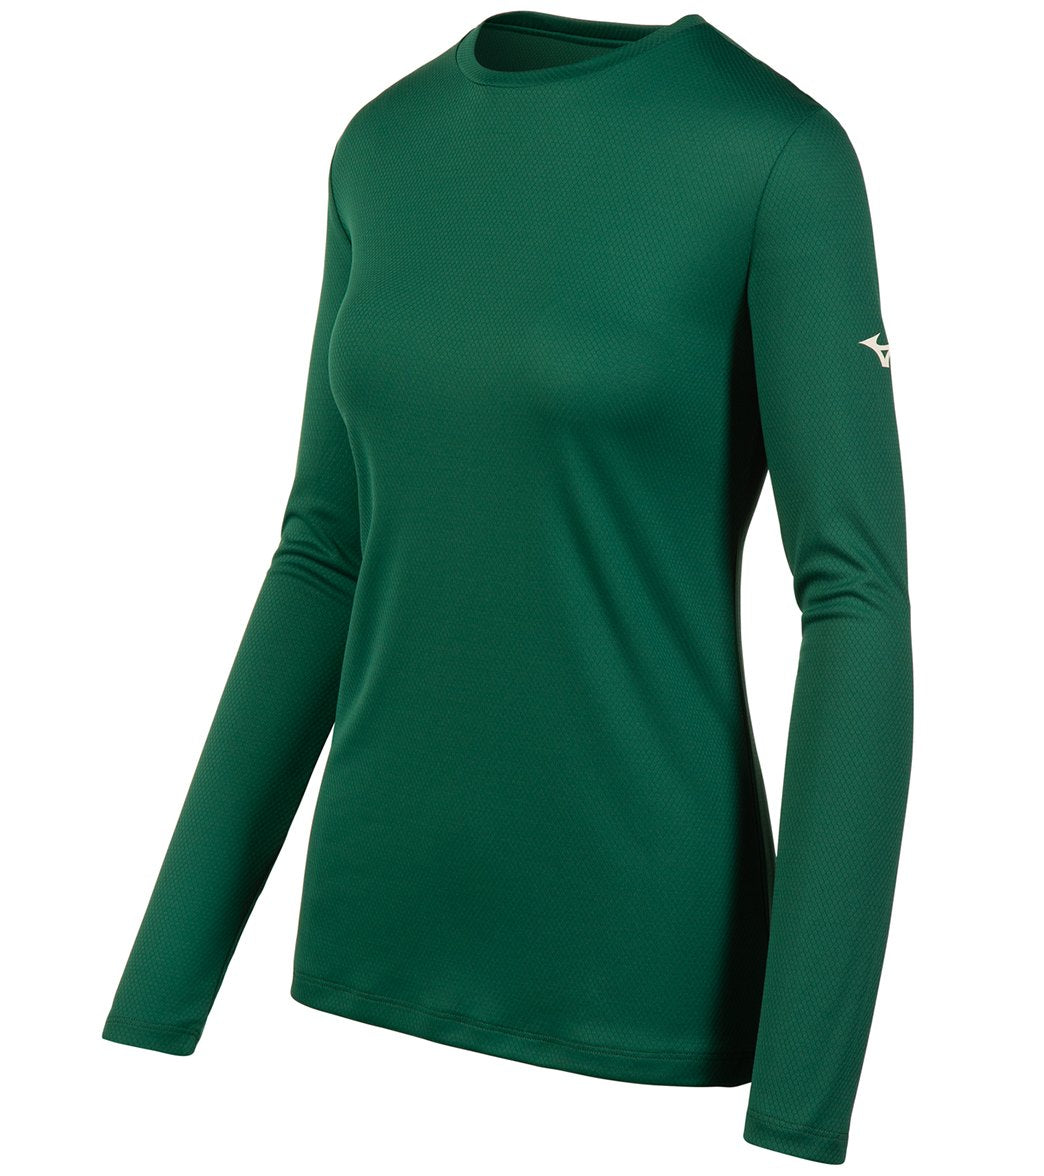 Mizuno Women's Long Sleeve Tee Shirt - Forest Large Polyester - Swimoutlet.com